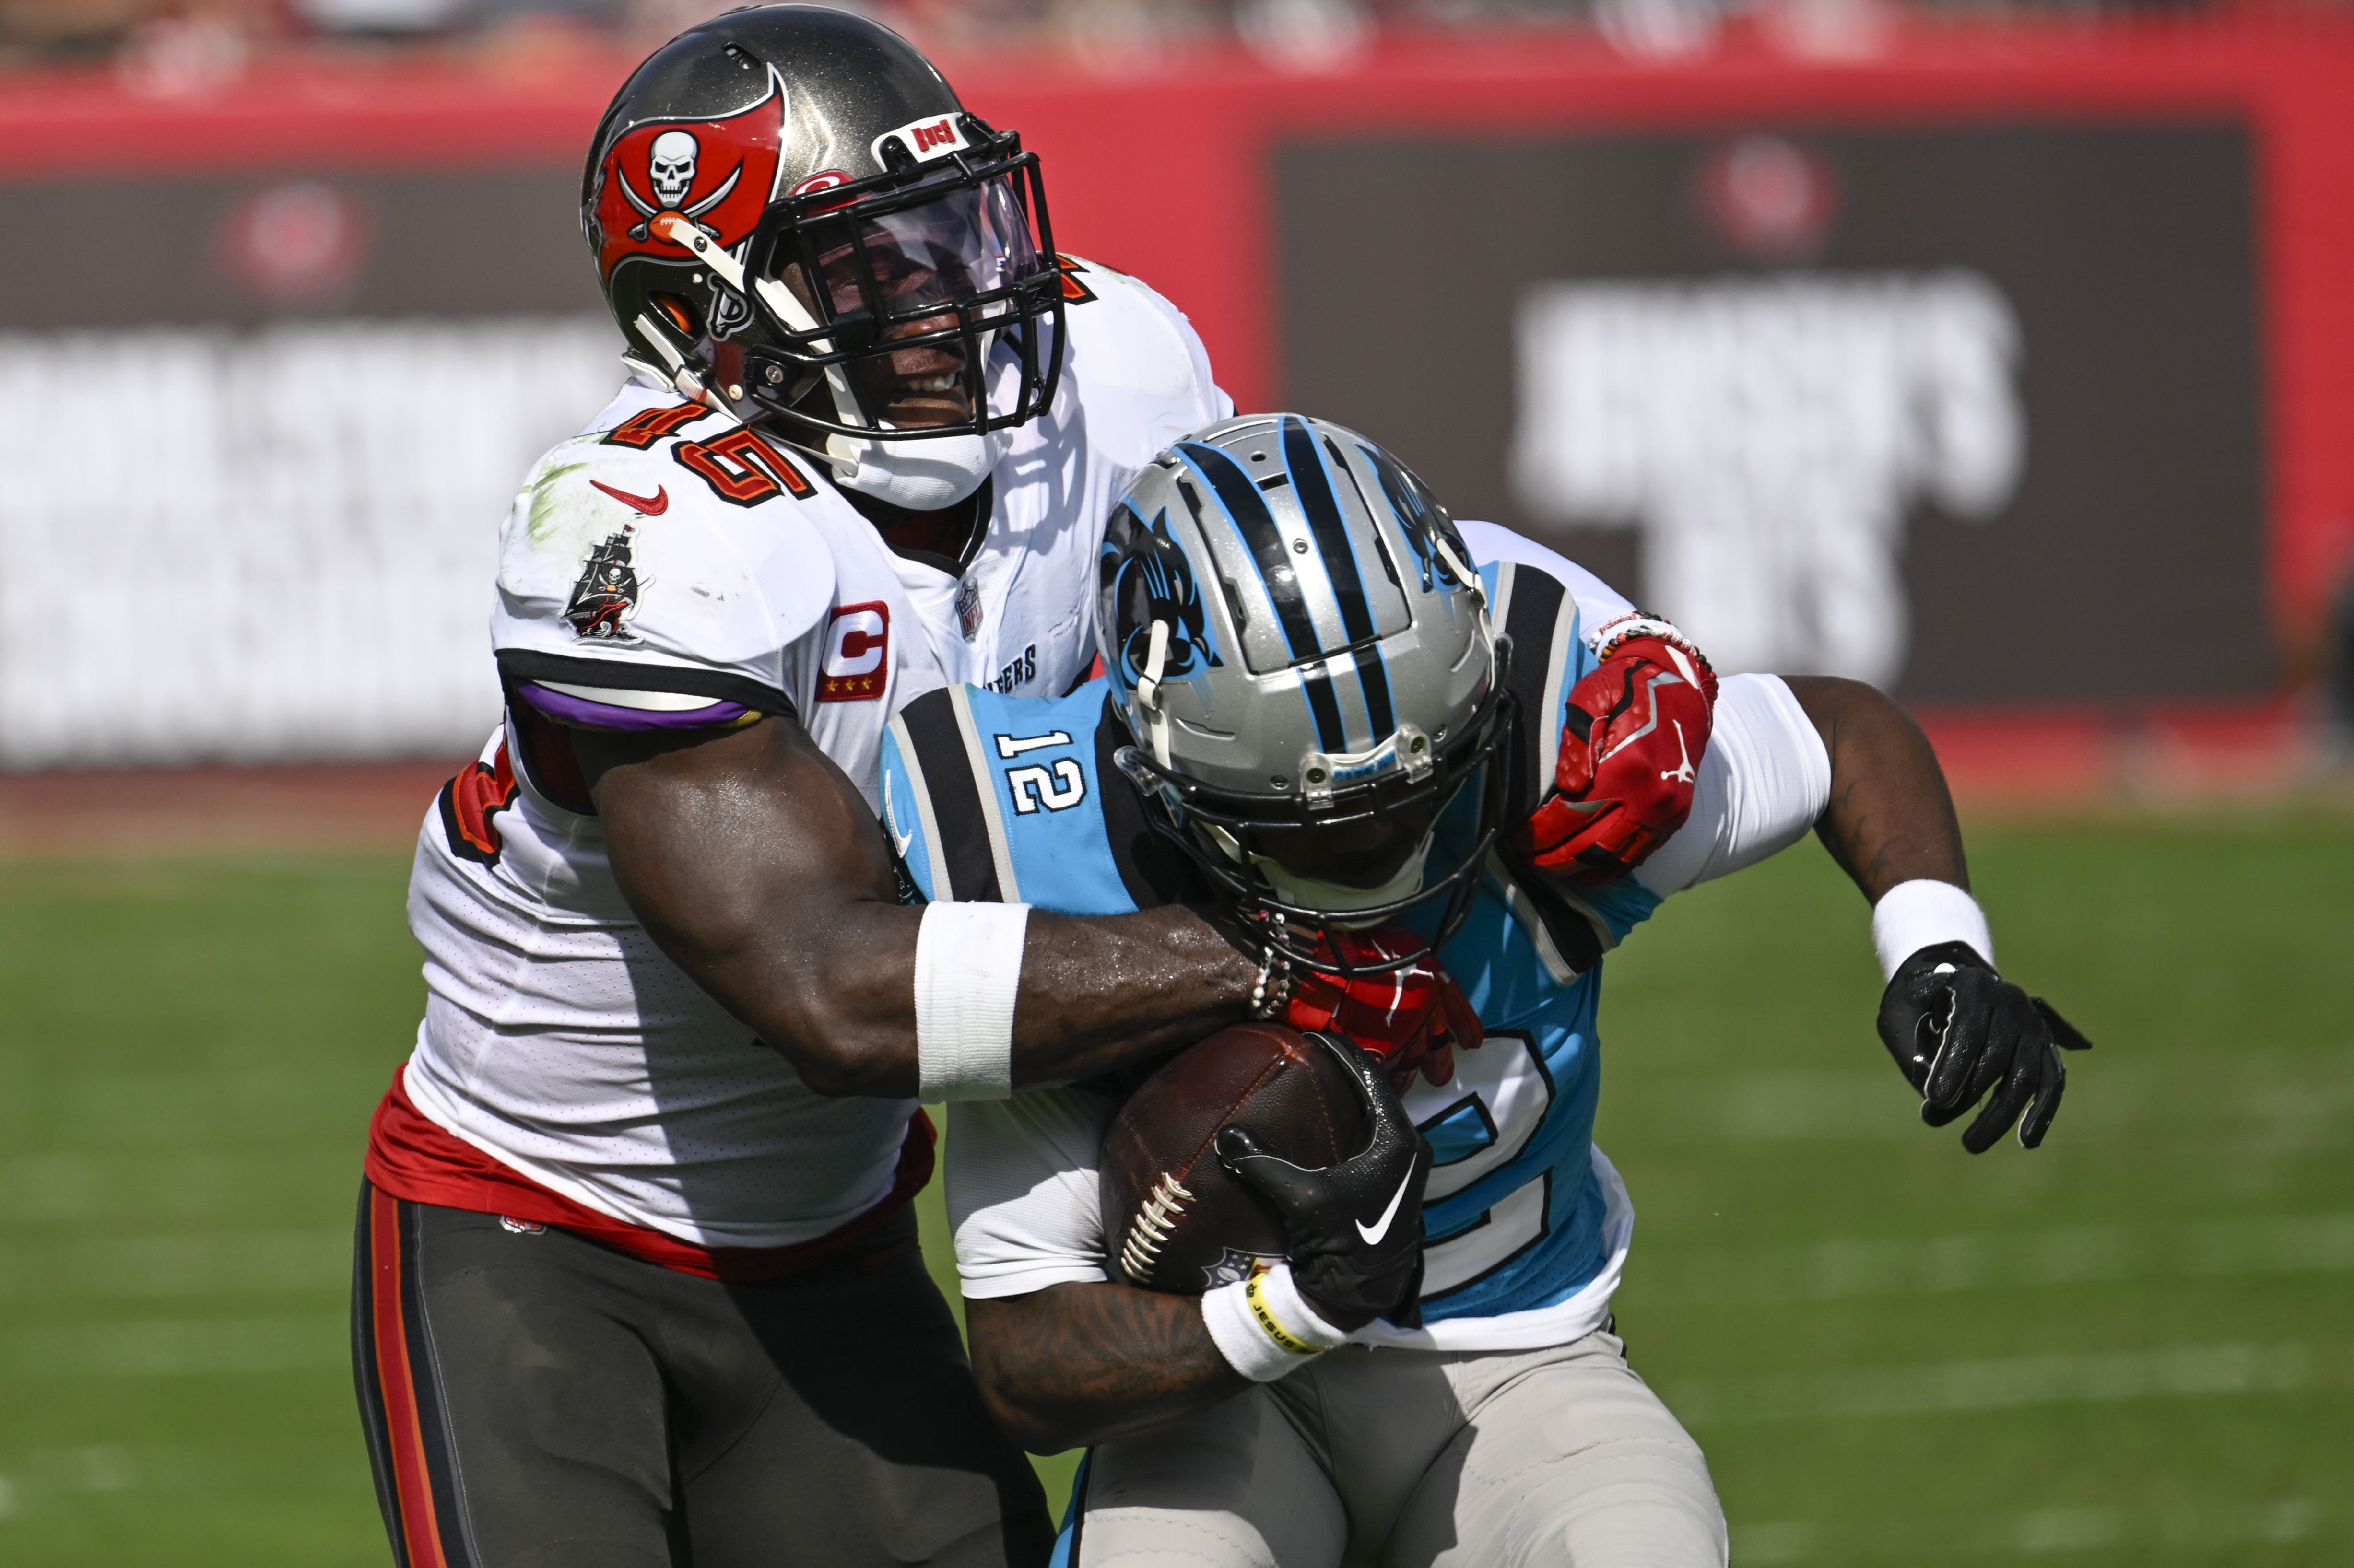 Panthers vs. Buccaneers Through The Years